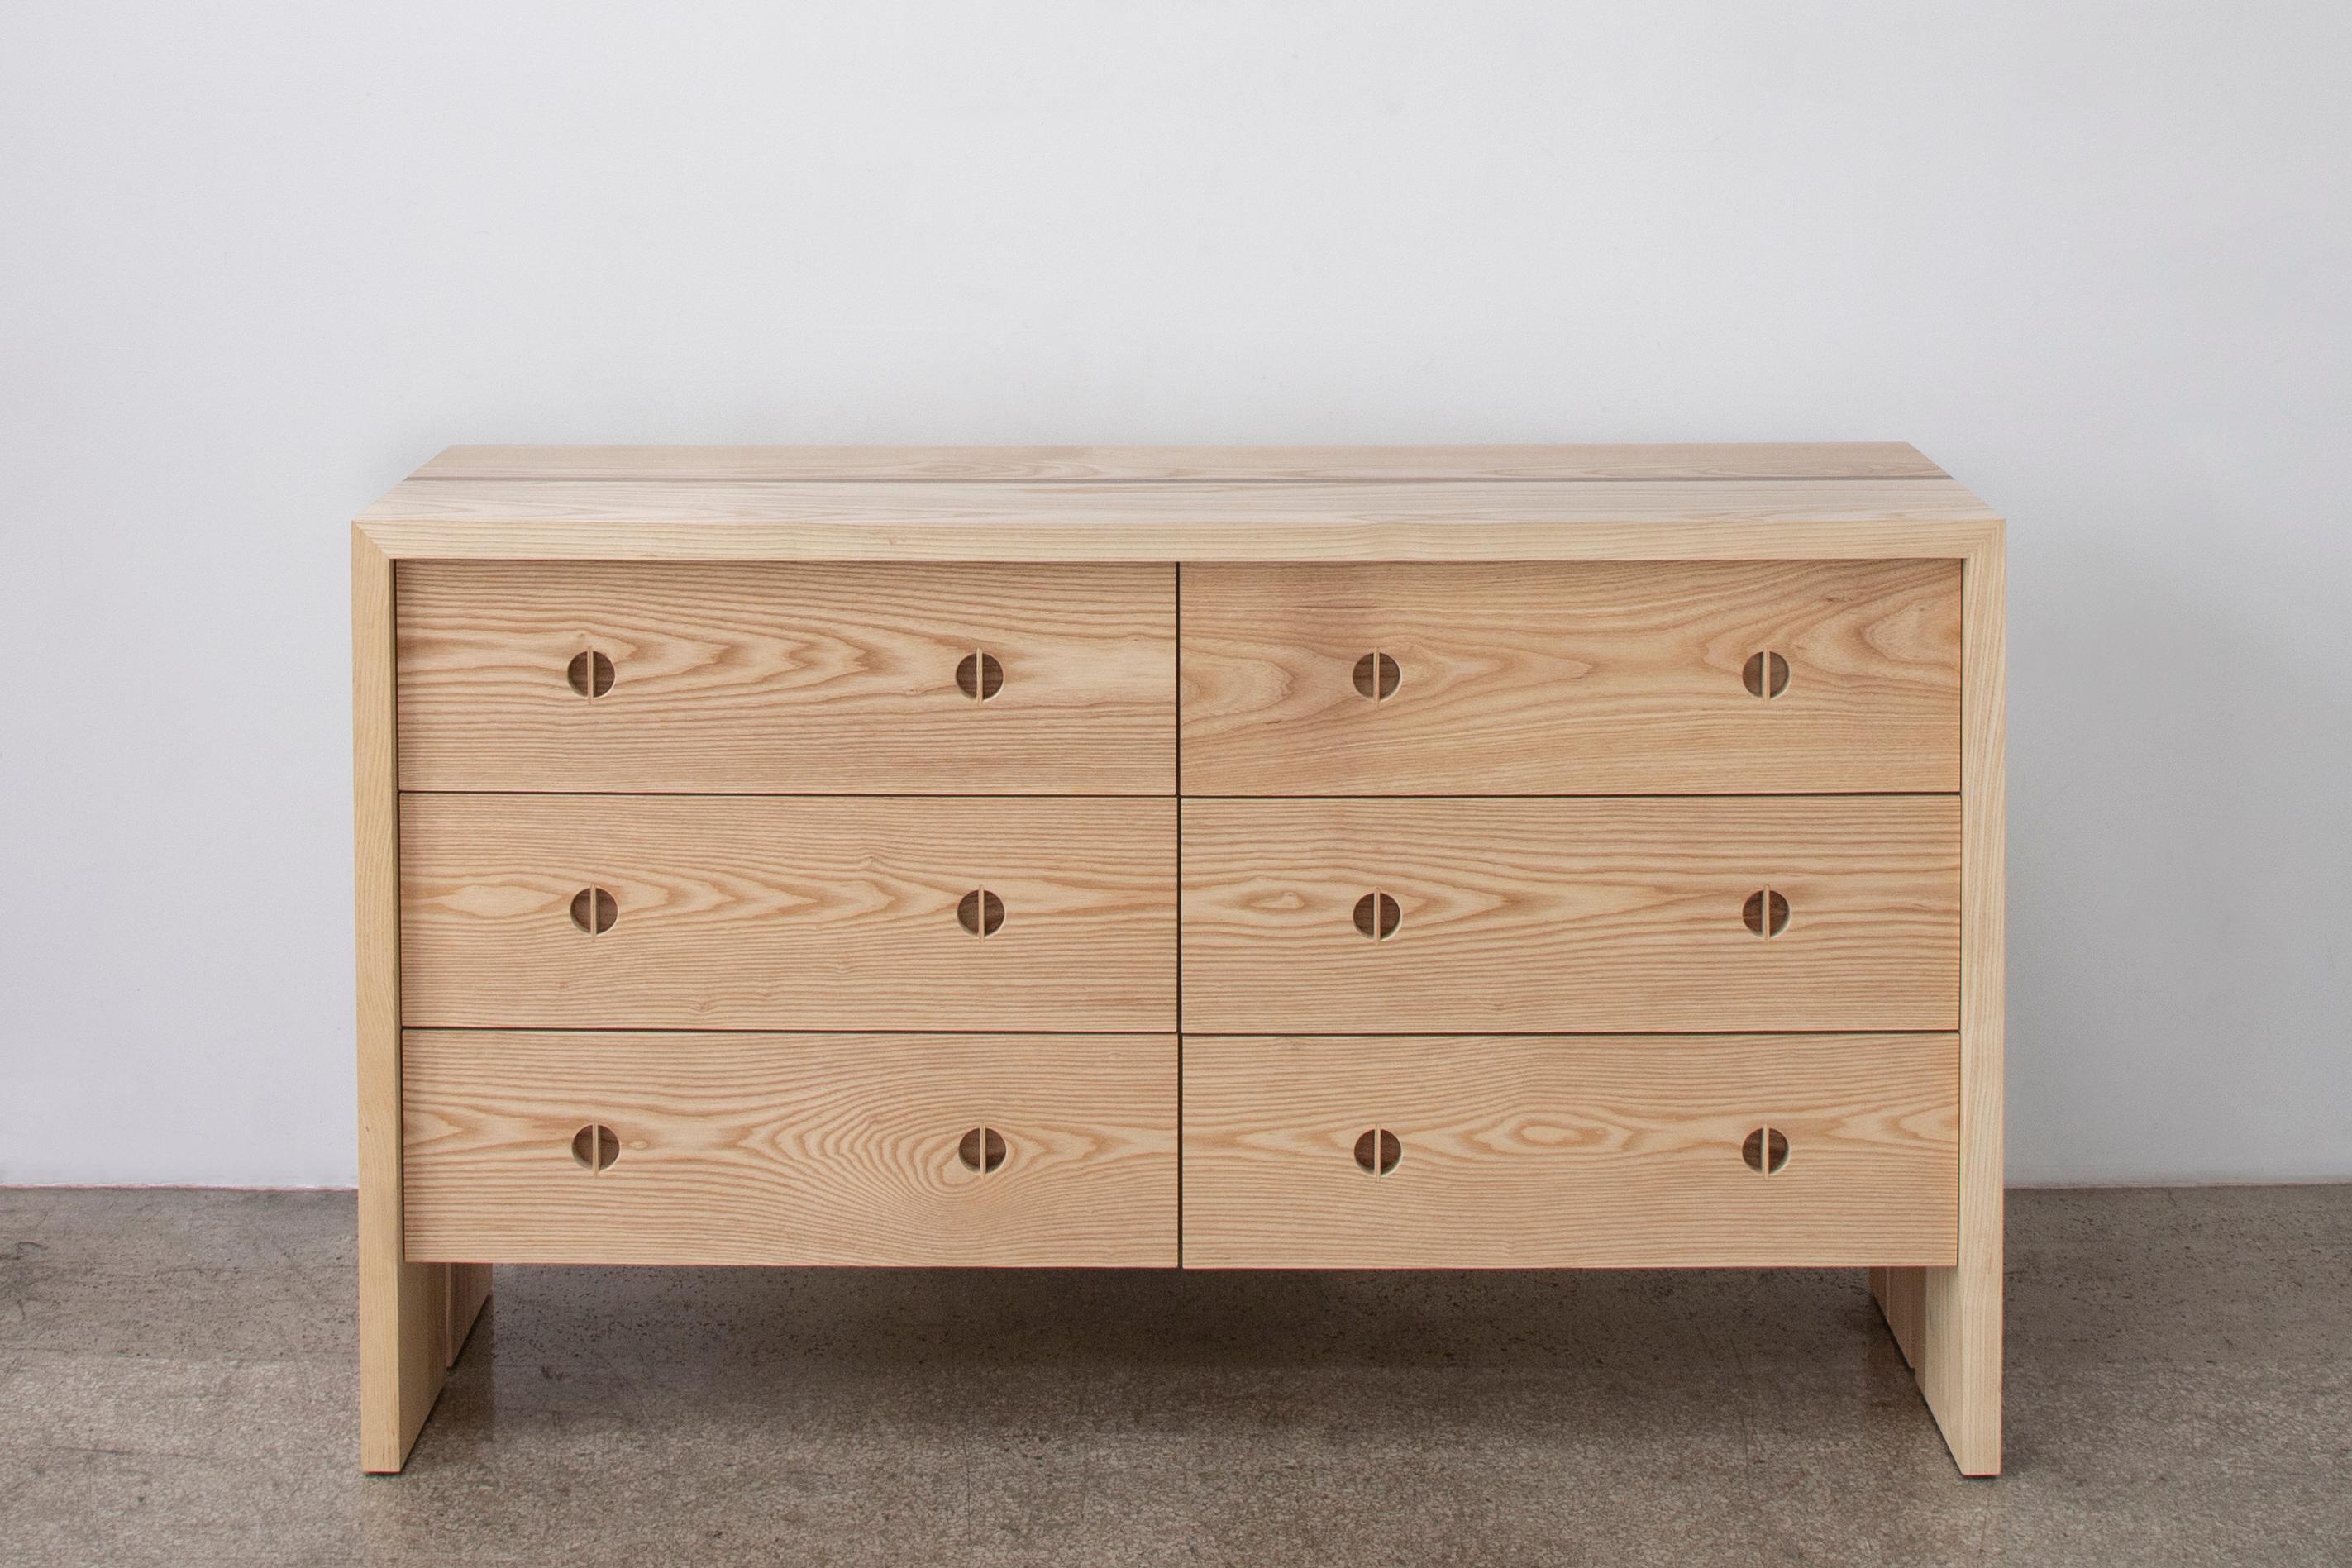 This modern wood dresser is hand-made in the United States with all hardwood construction. Characterized by its solid ash wood body, minimalist walnut inlay detail, and unique split leg detail this contemporary wood dresser has deep storage drawers